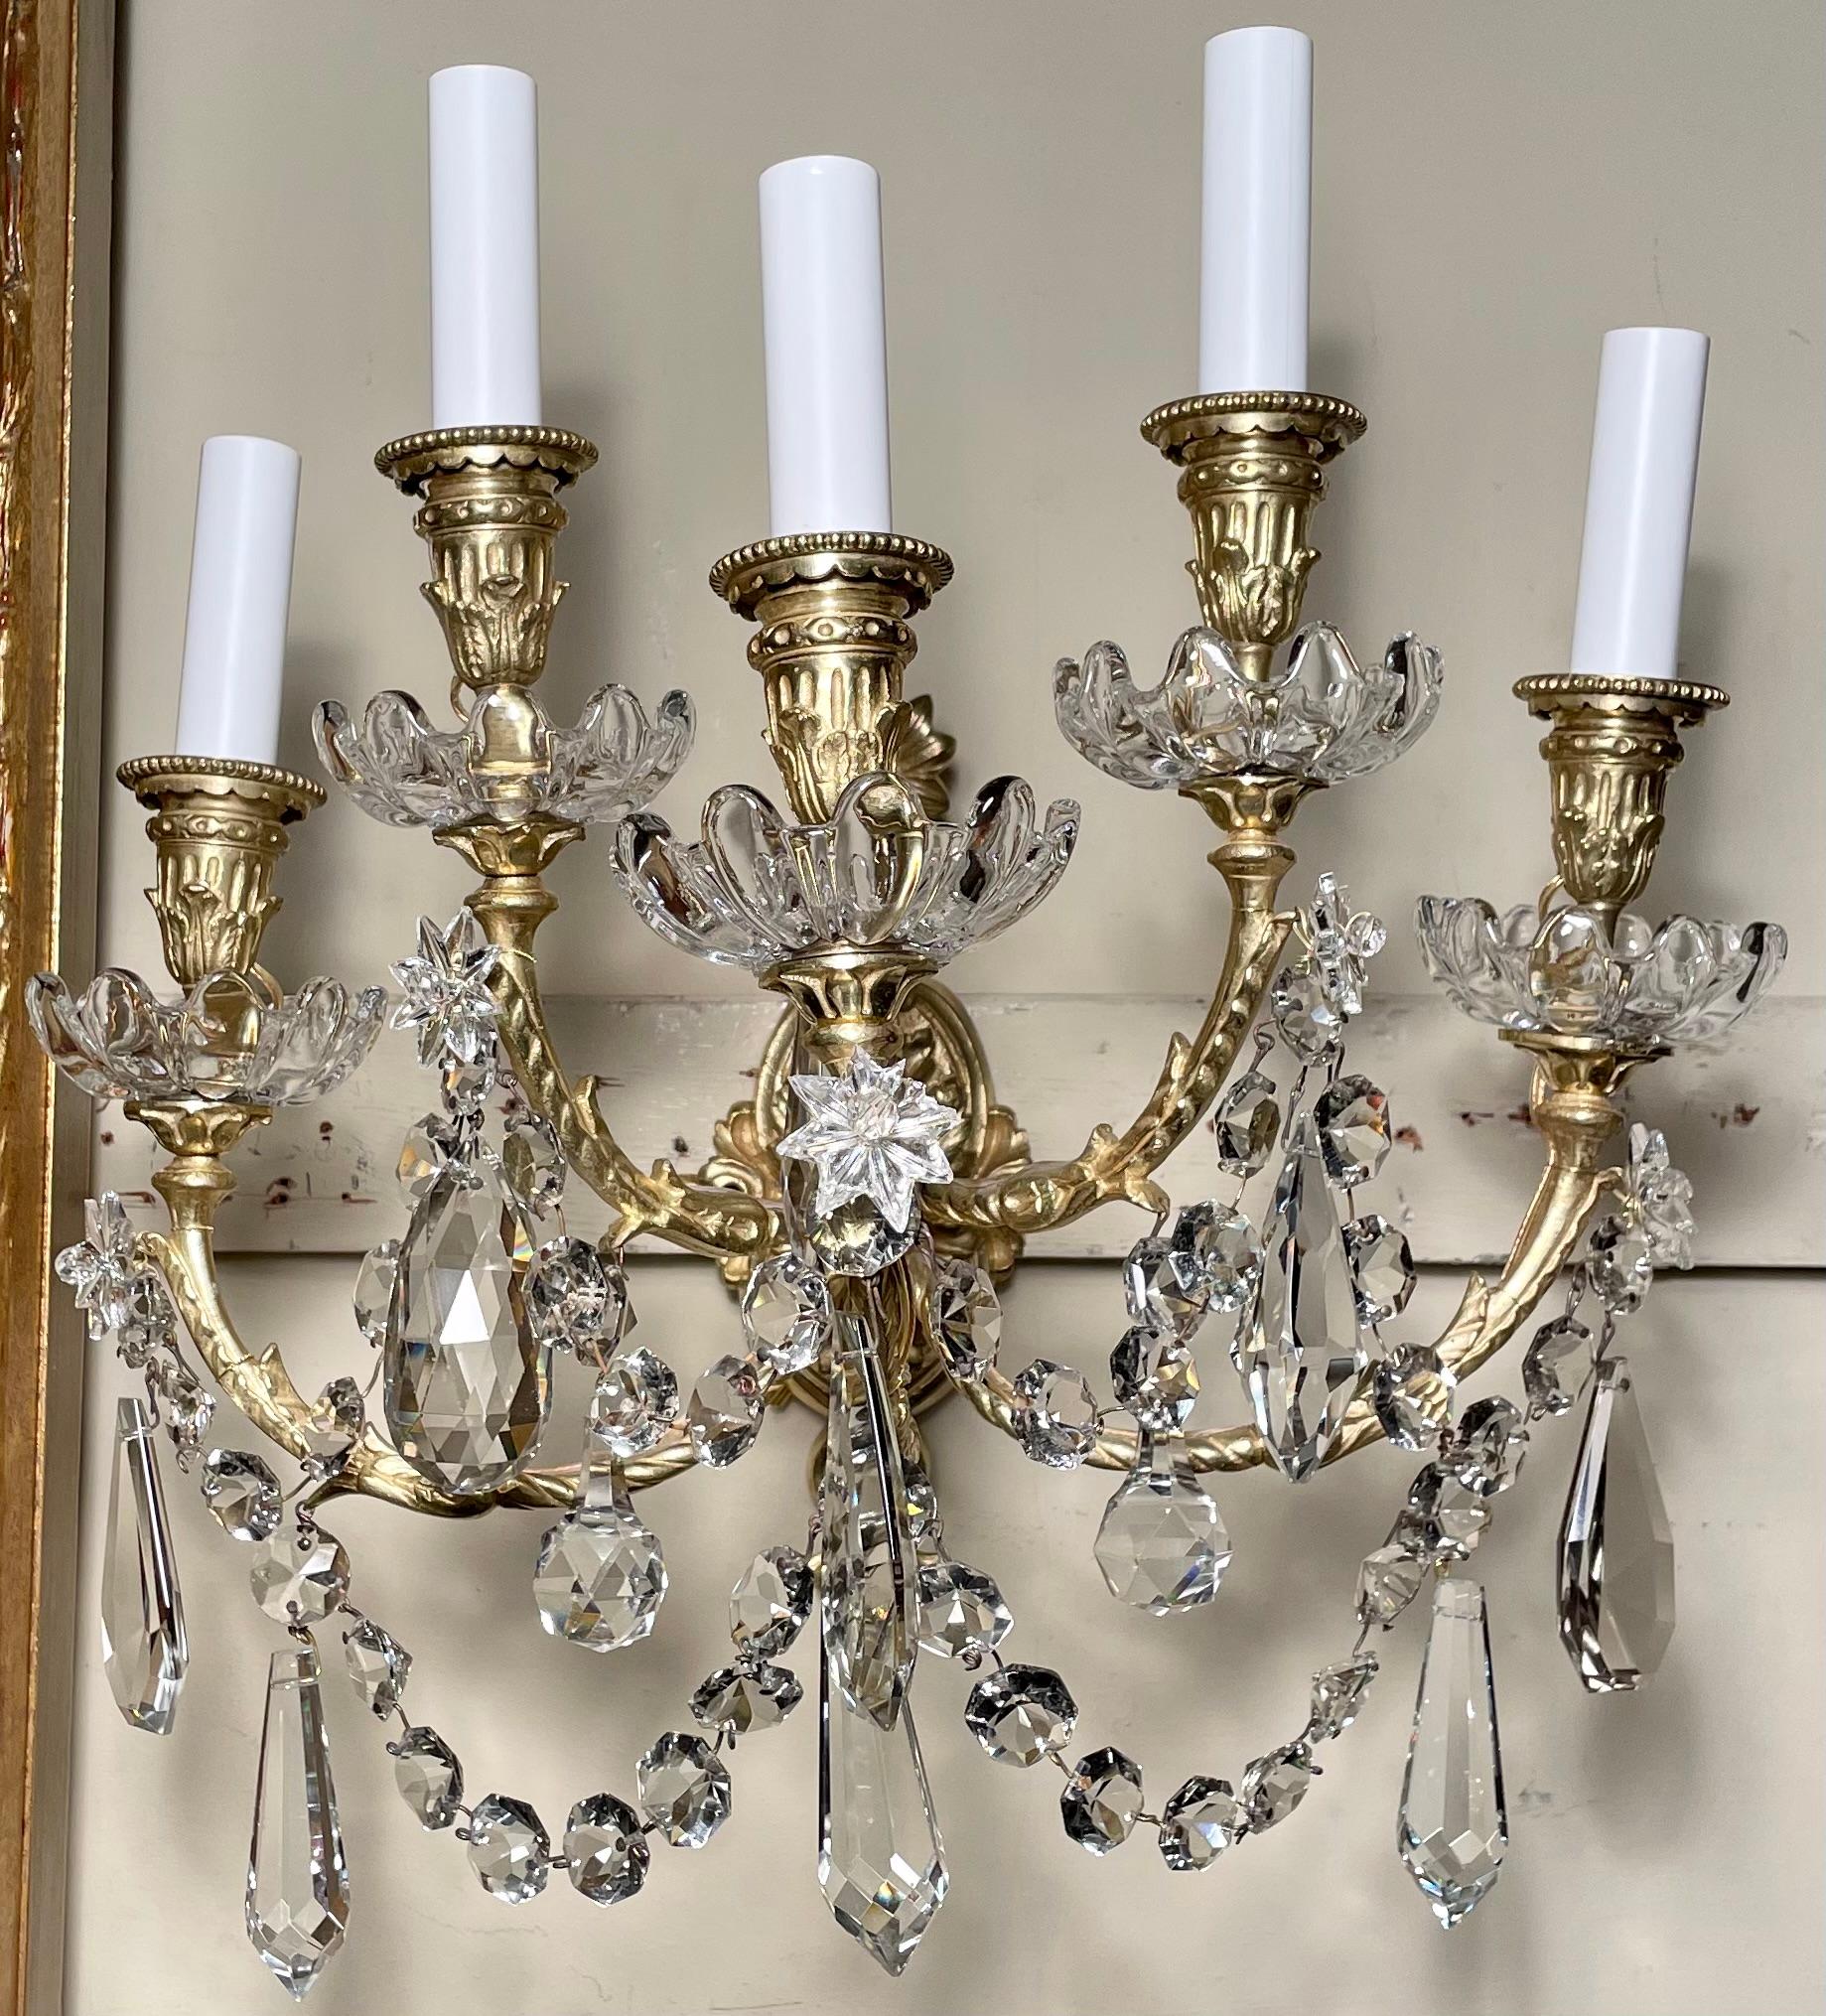 Pair Antique French Ormolu bronze and baccarat crystal five light sconces, Circa 1890.